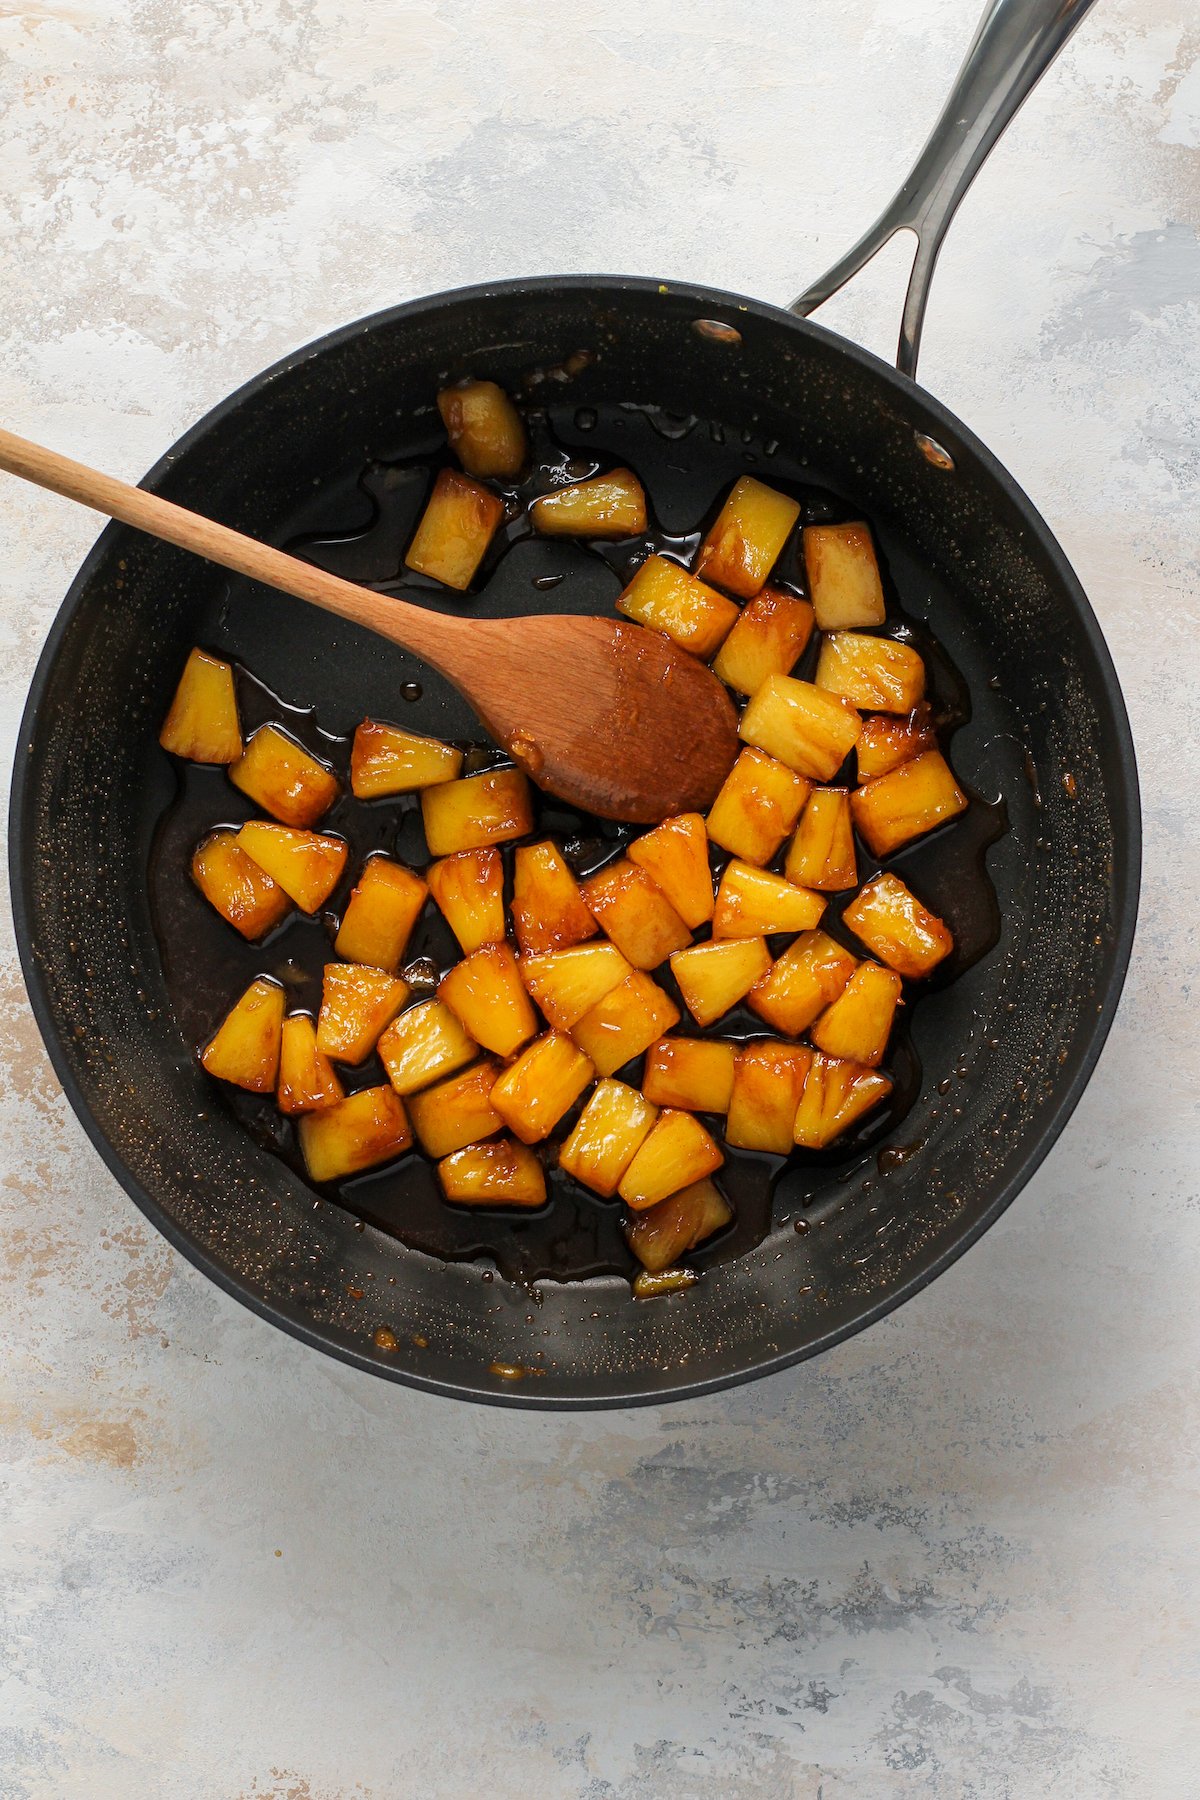 Pineapple chunks cooking in a skillet.